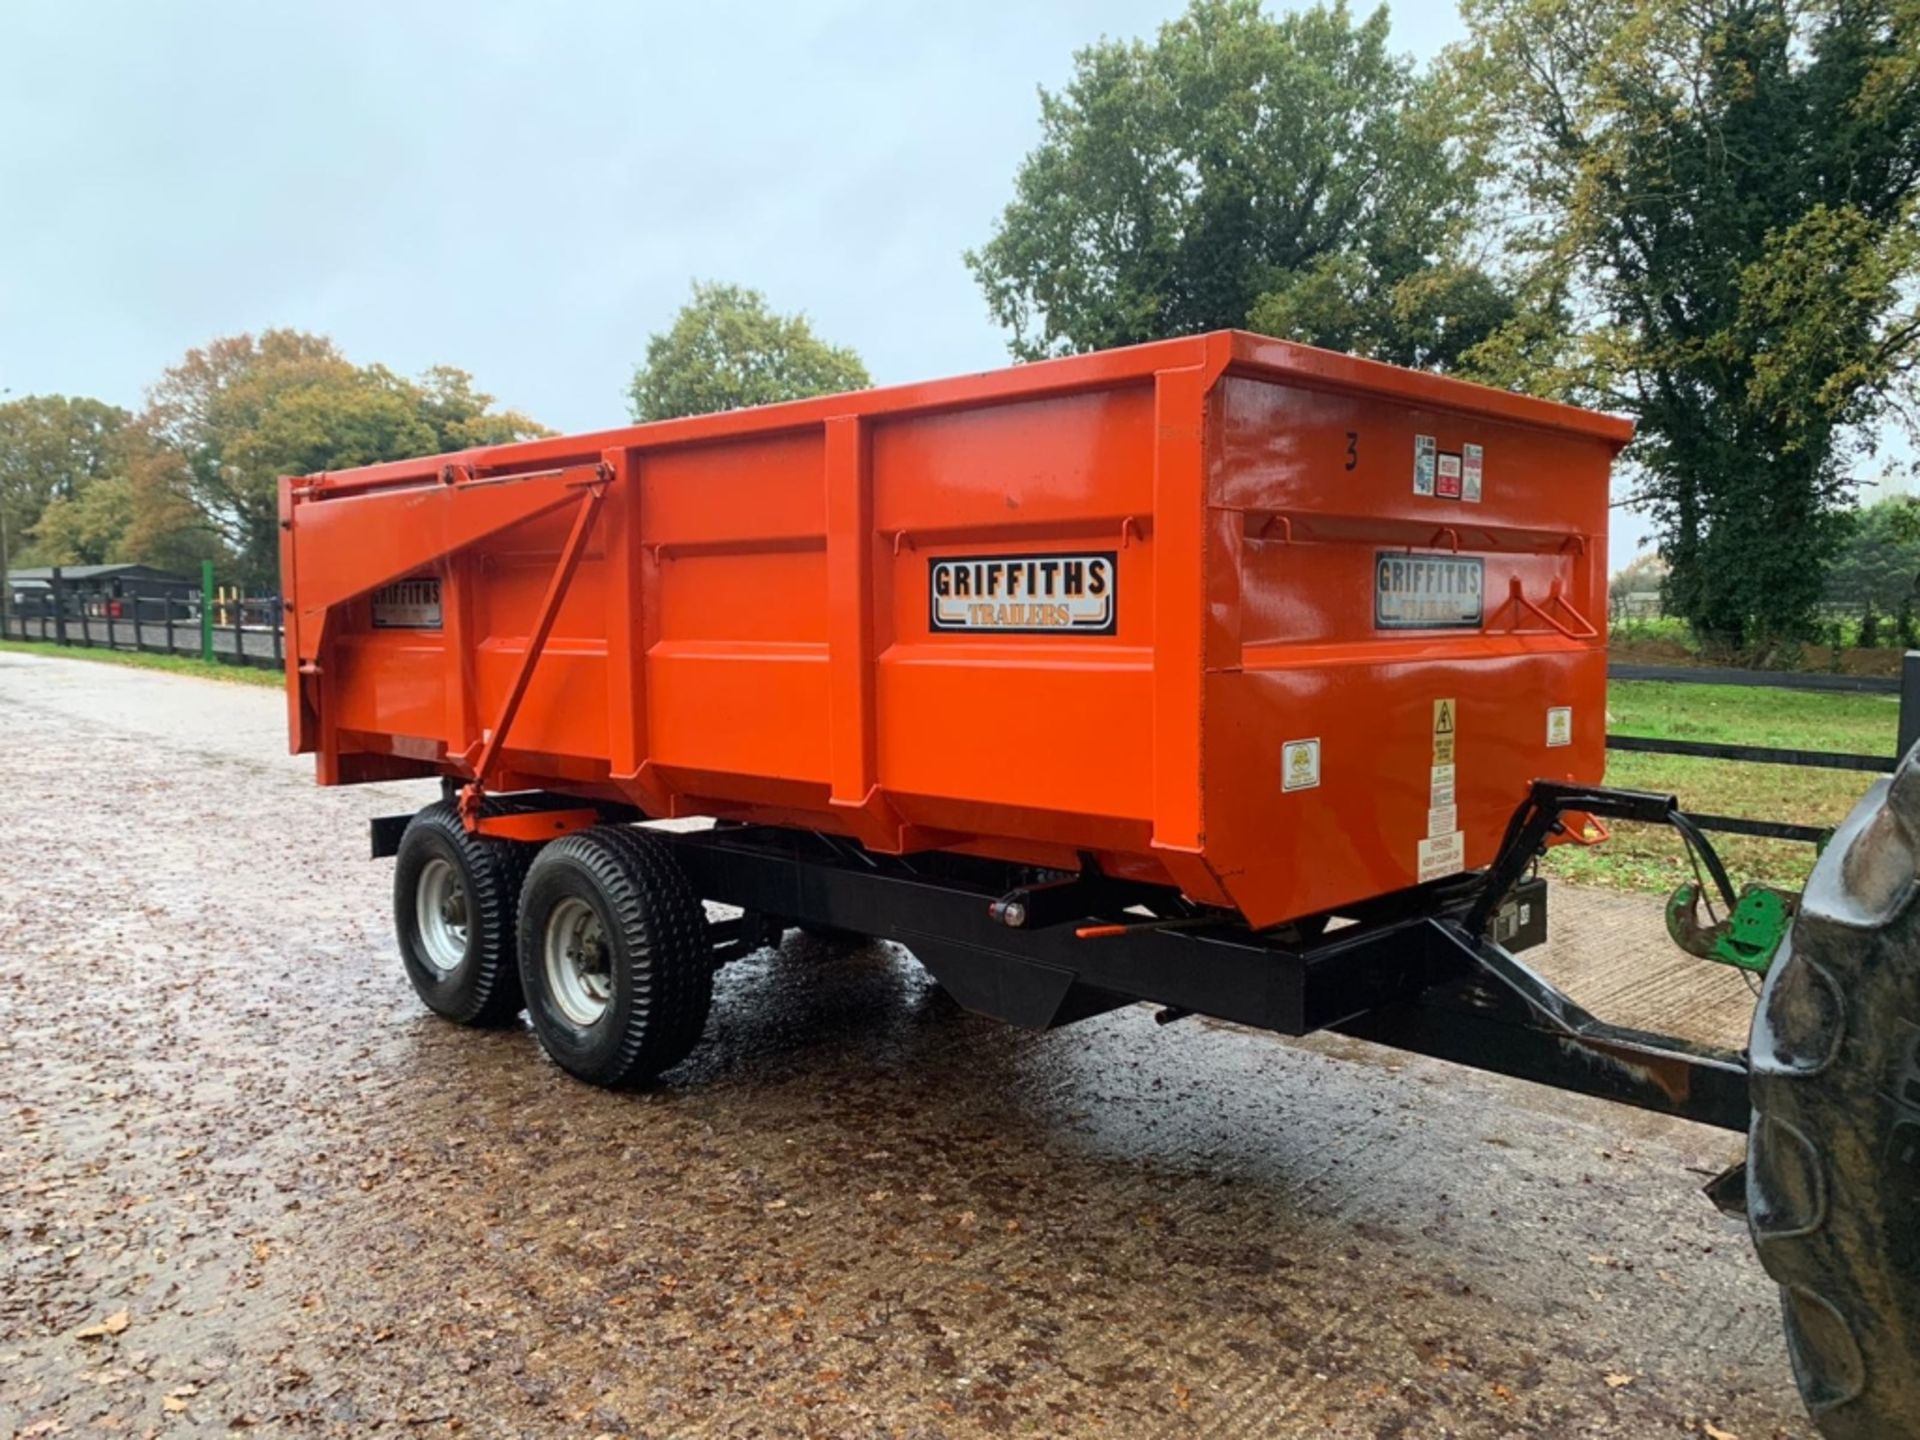 Griffiths 8ton tipping trailer - Image 9 of 9